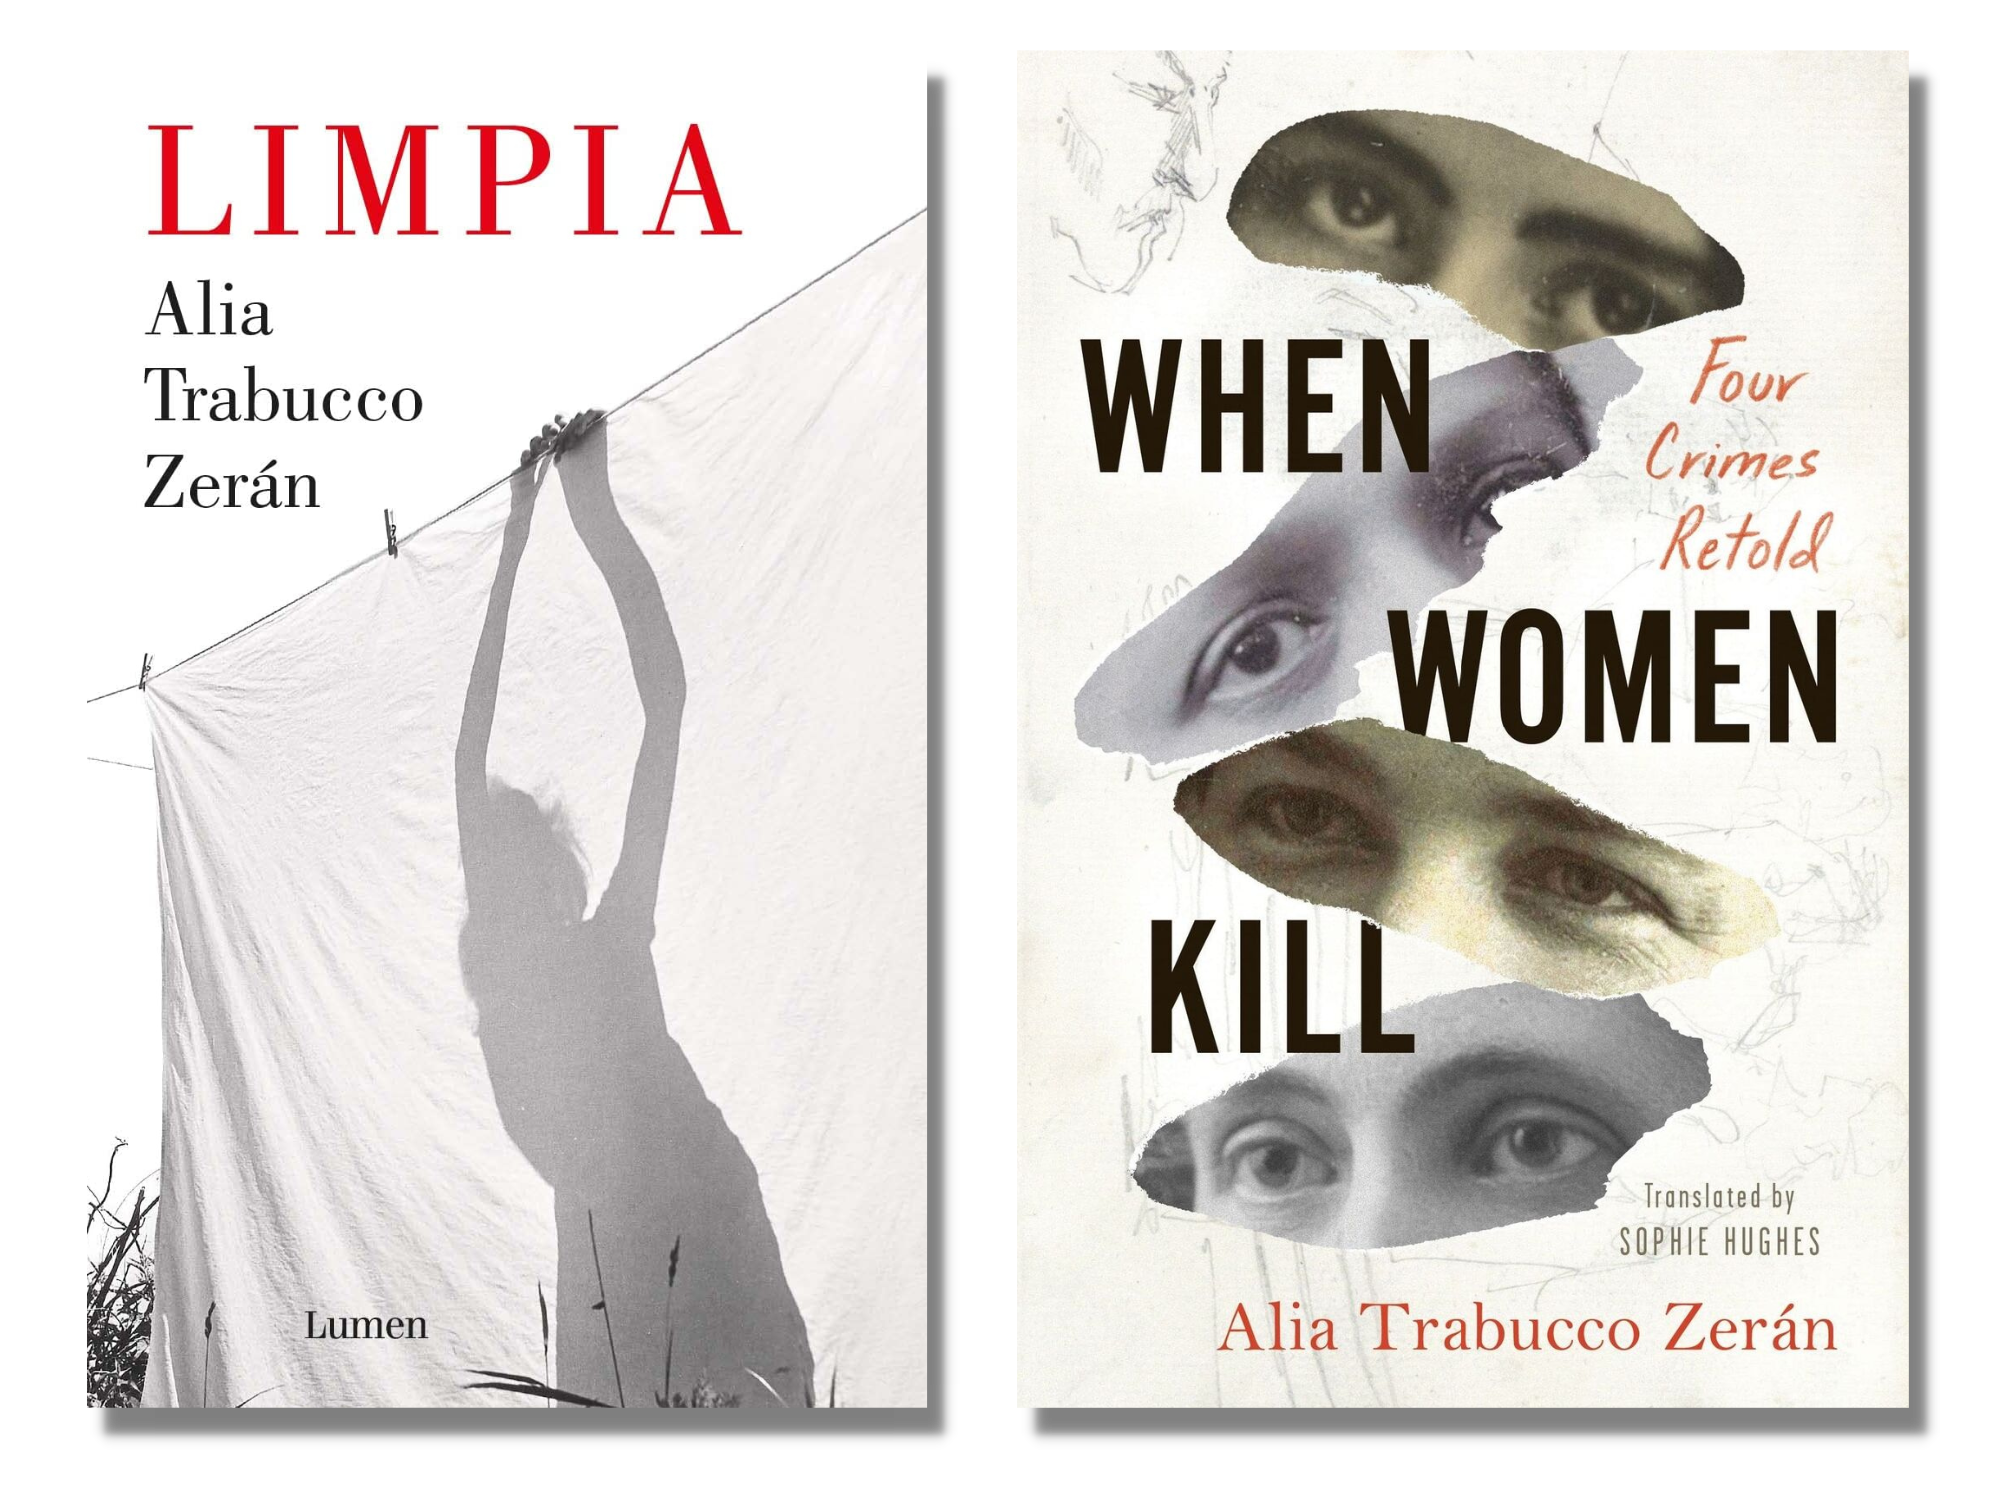 The covers of "Limpia" and "When Women Kill"